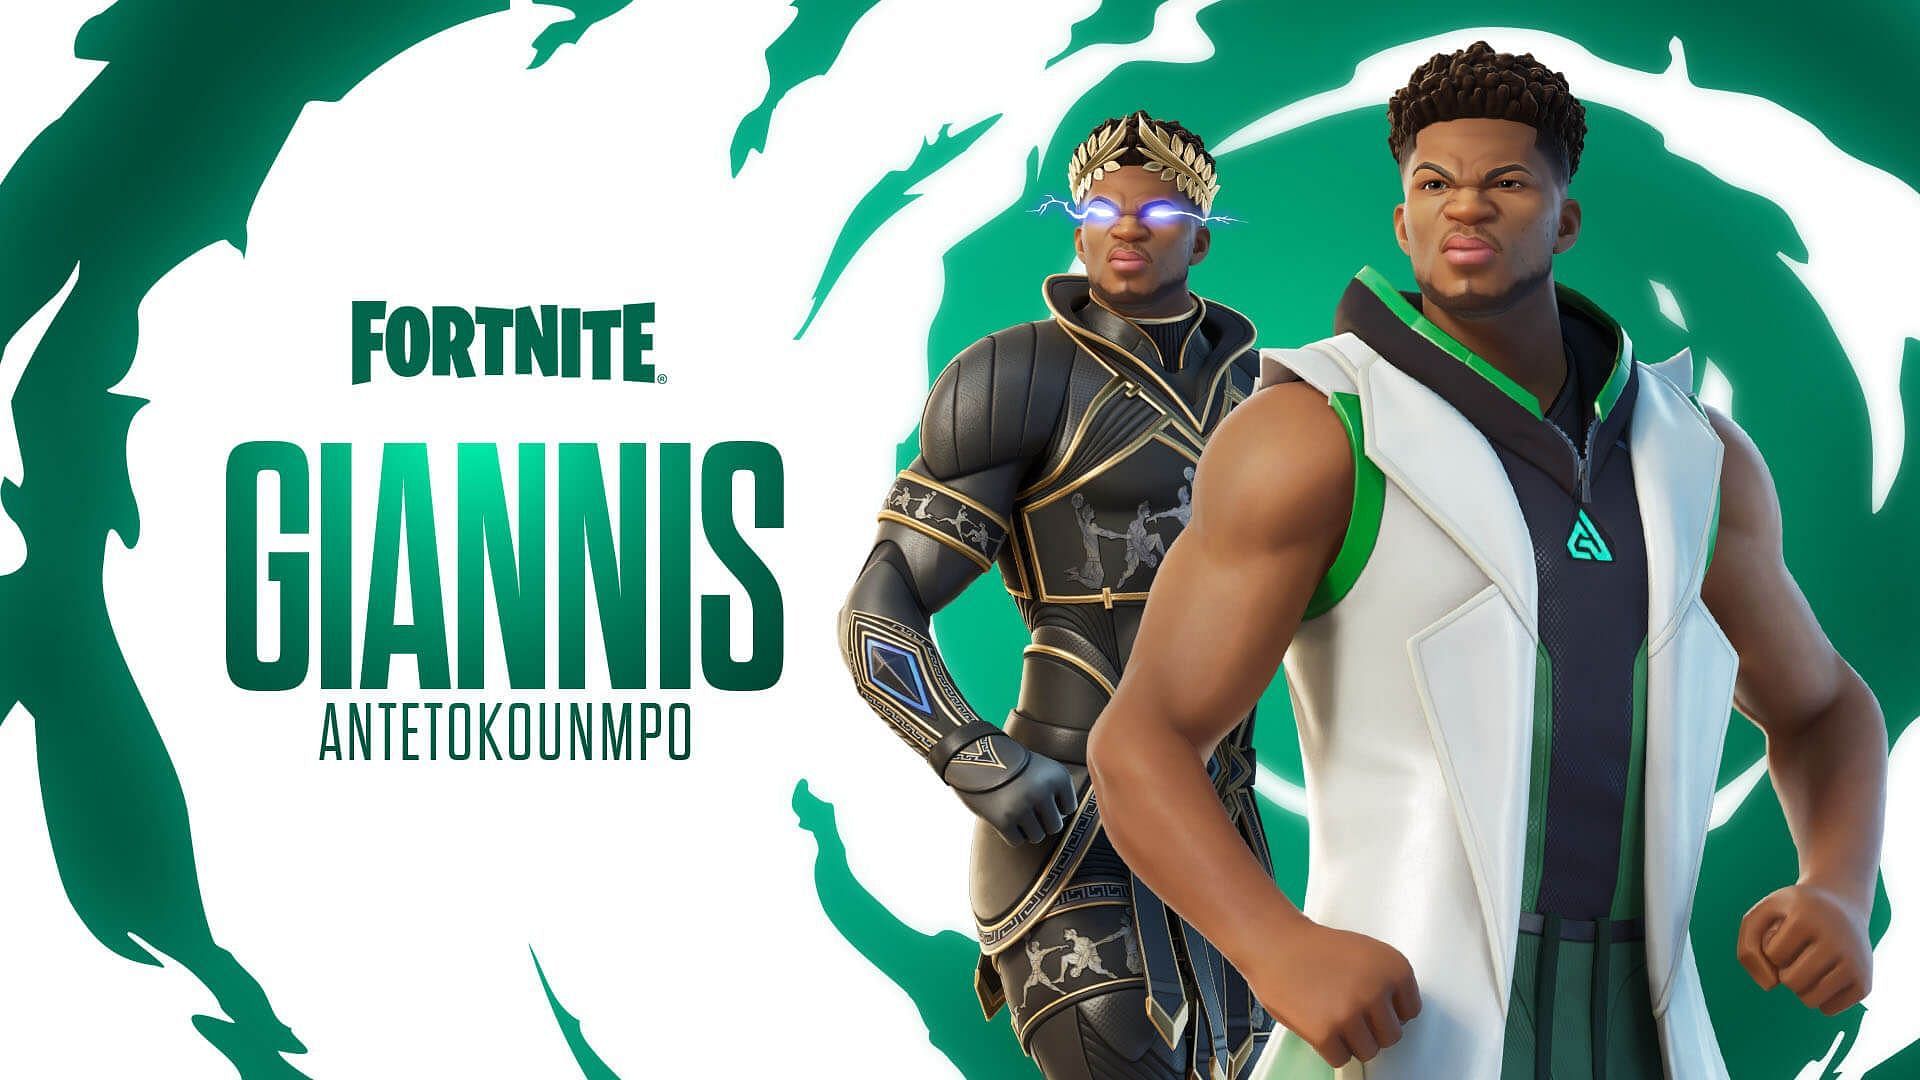 Giannis Antetokounmpo will be released in the Item Shop on December 24, 2022 (Image via Epic Games/Fortnite)